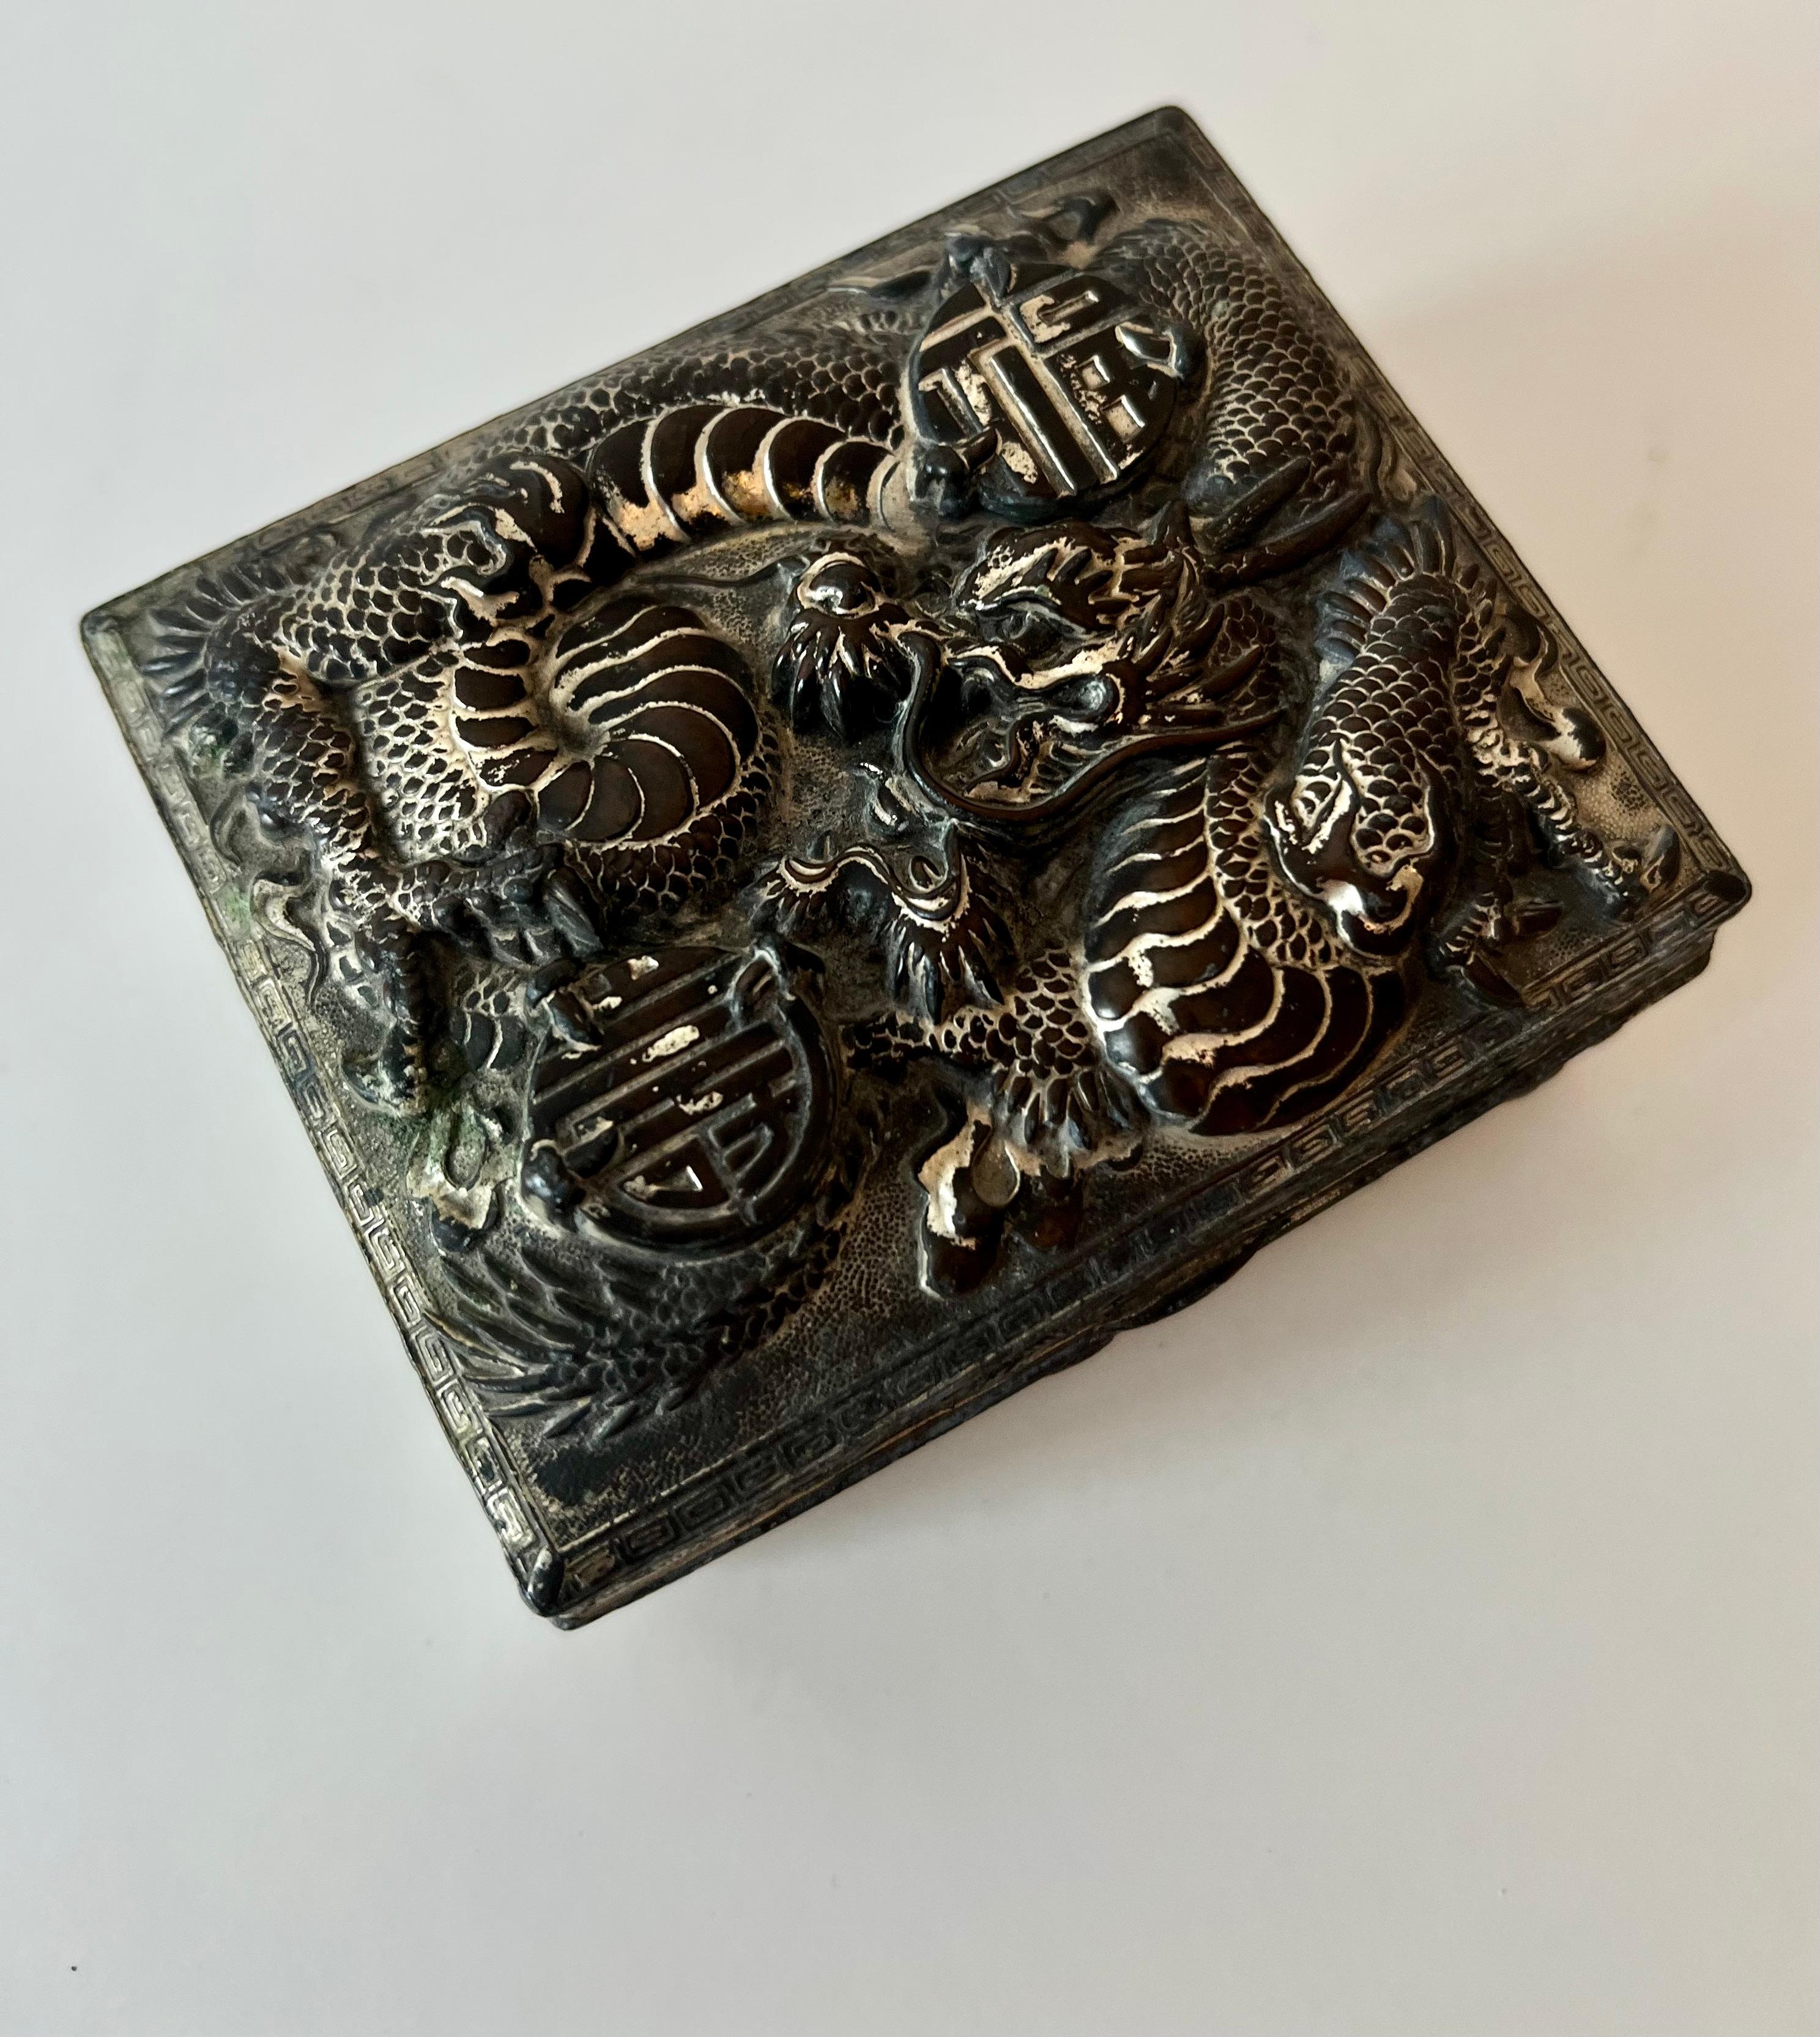 Repoussé Asian Repousse Lidded box with Wooden Interior For Sale